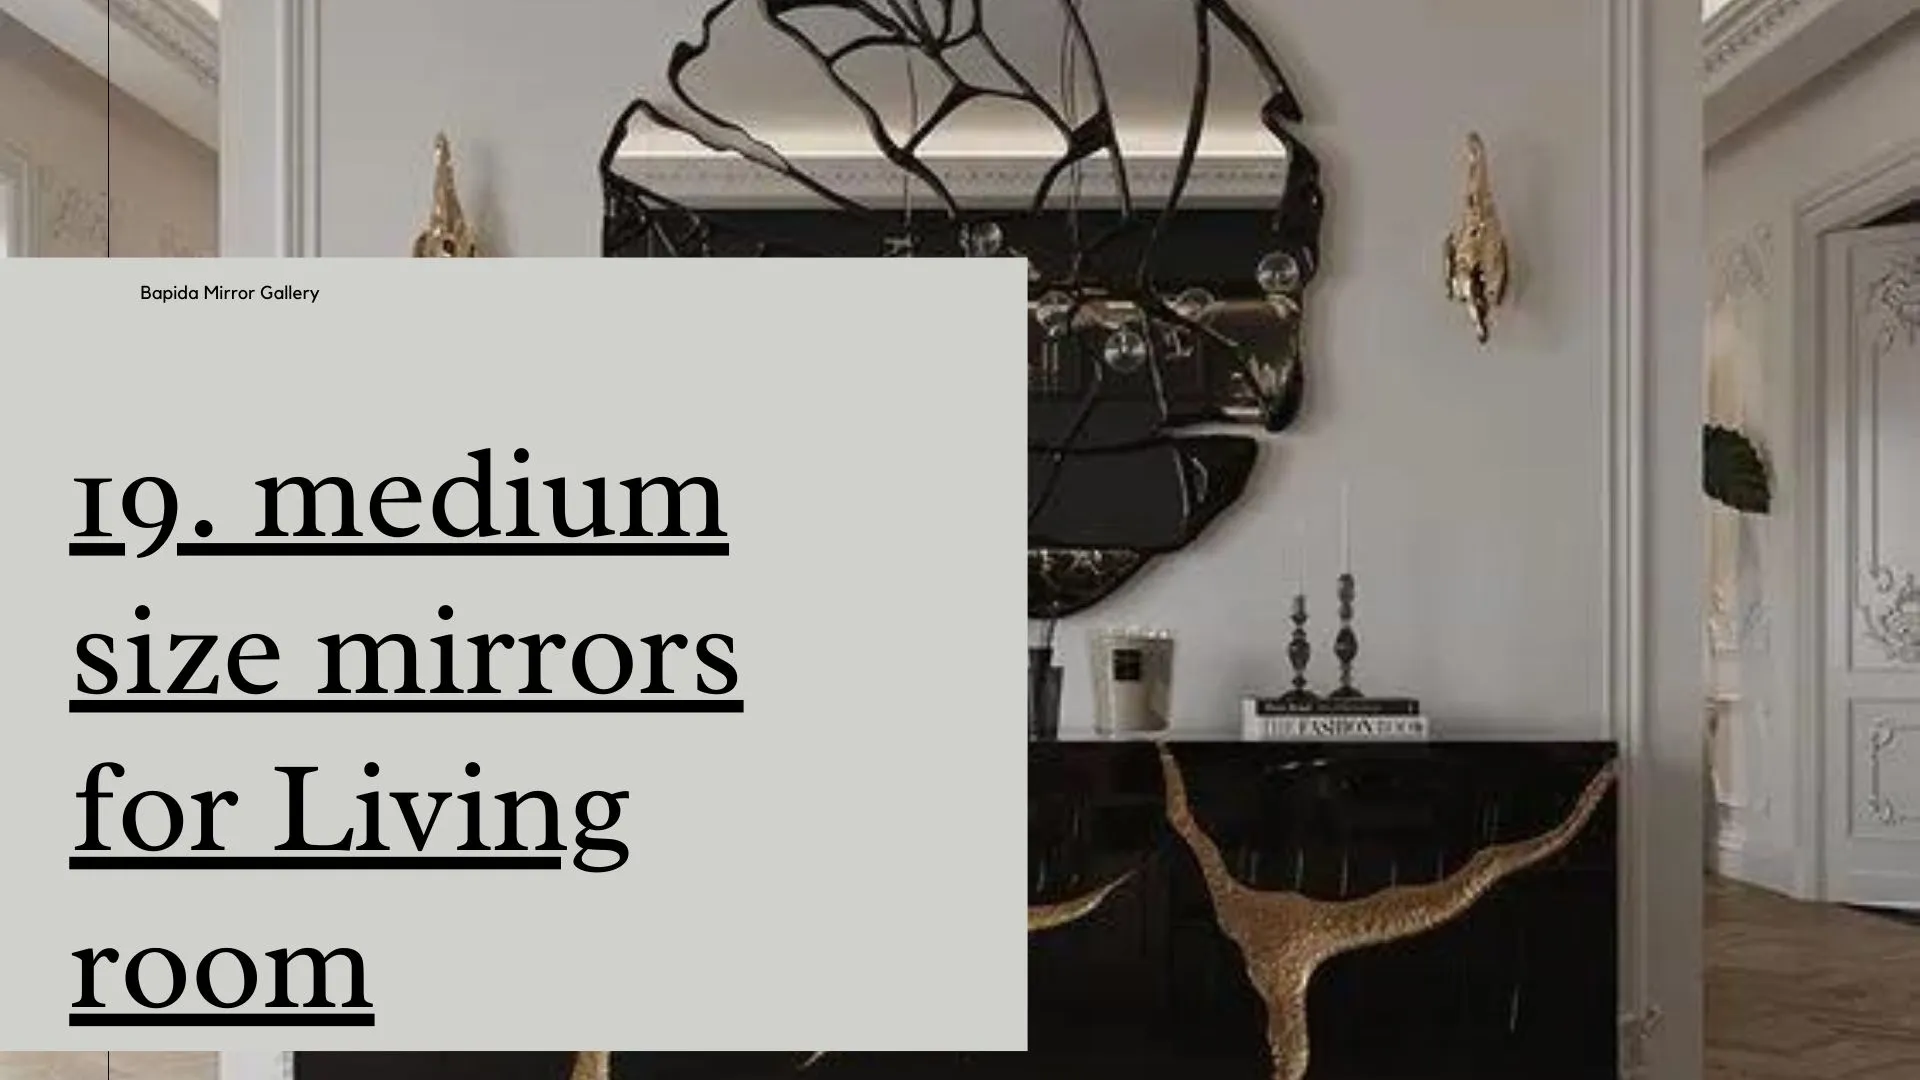 Medium Size Mirrors for Living Room